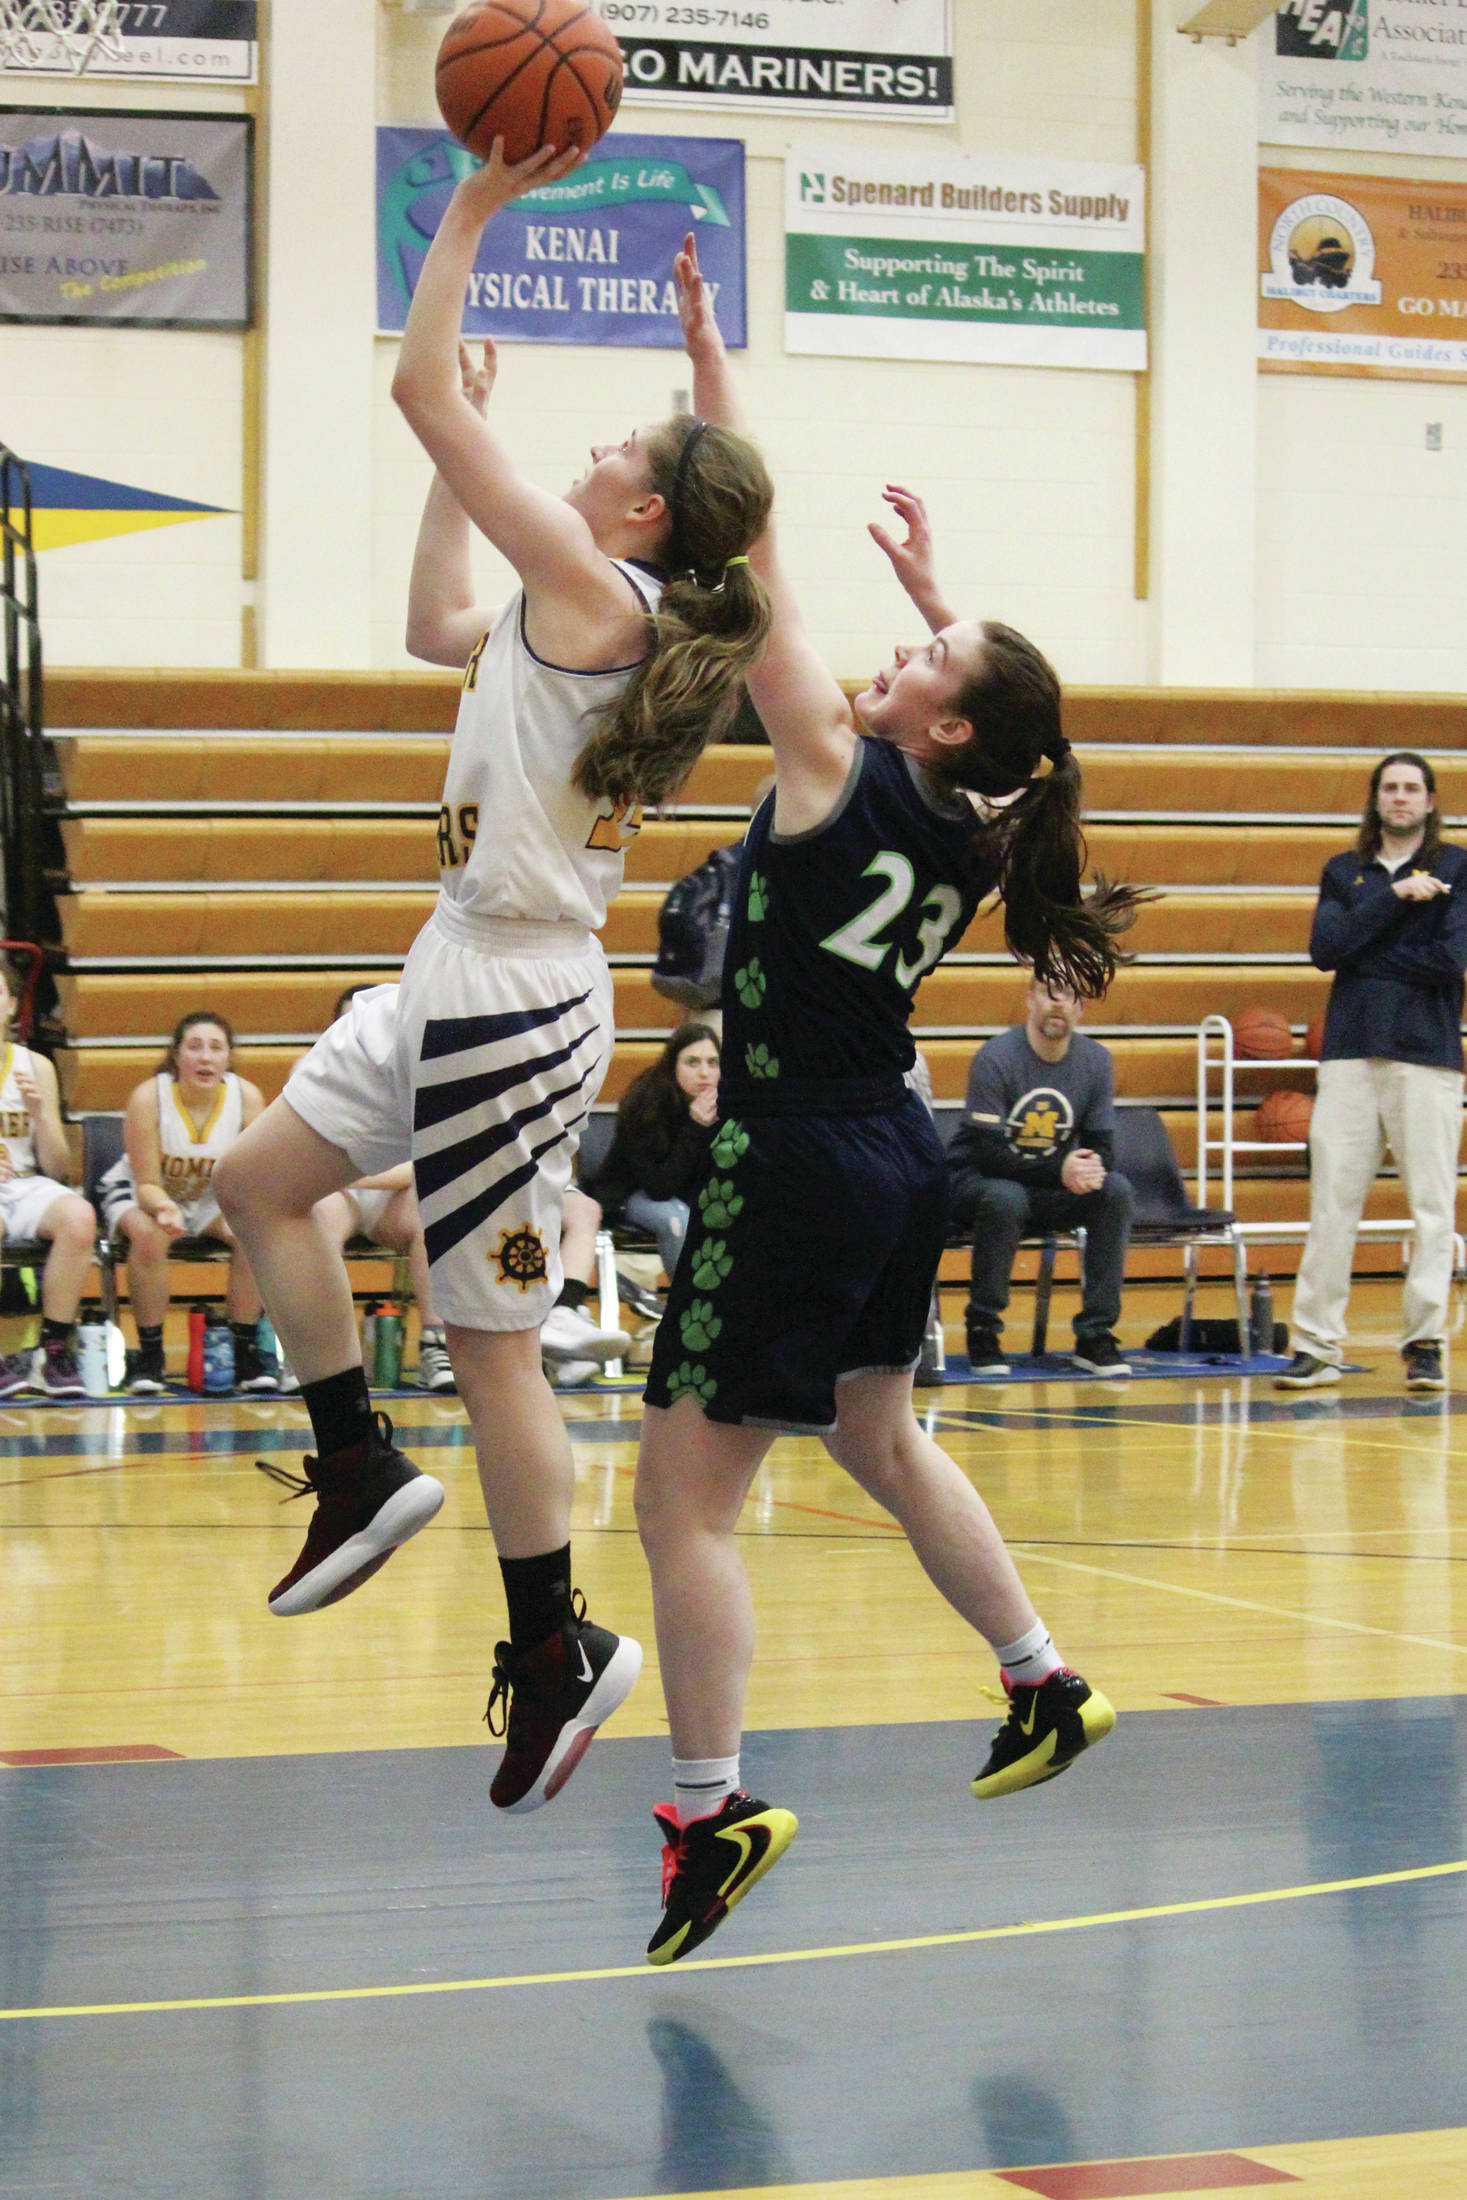 Redington’s Lexi Seymore follows Homer’s Laura Inama as she goes up for a basket during a Friday, Feb. 21, 2020 basketball game in the Alice Witte Gymnasium in Homer, Alaska. (Photo by Megan Pacer/Homer News)